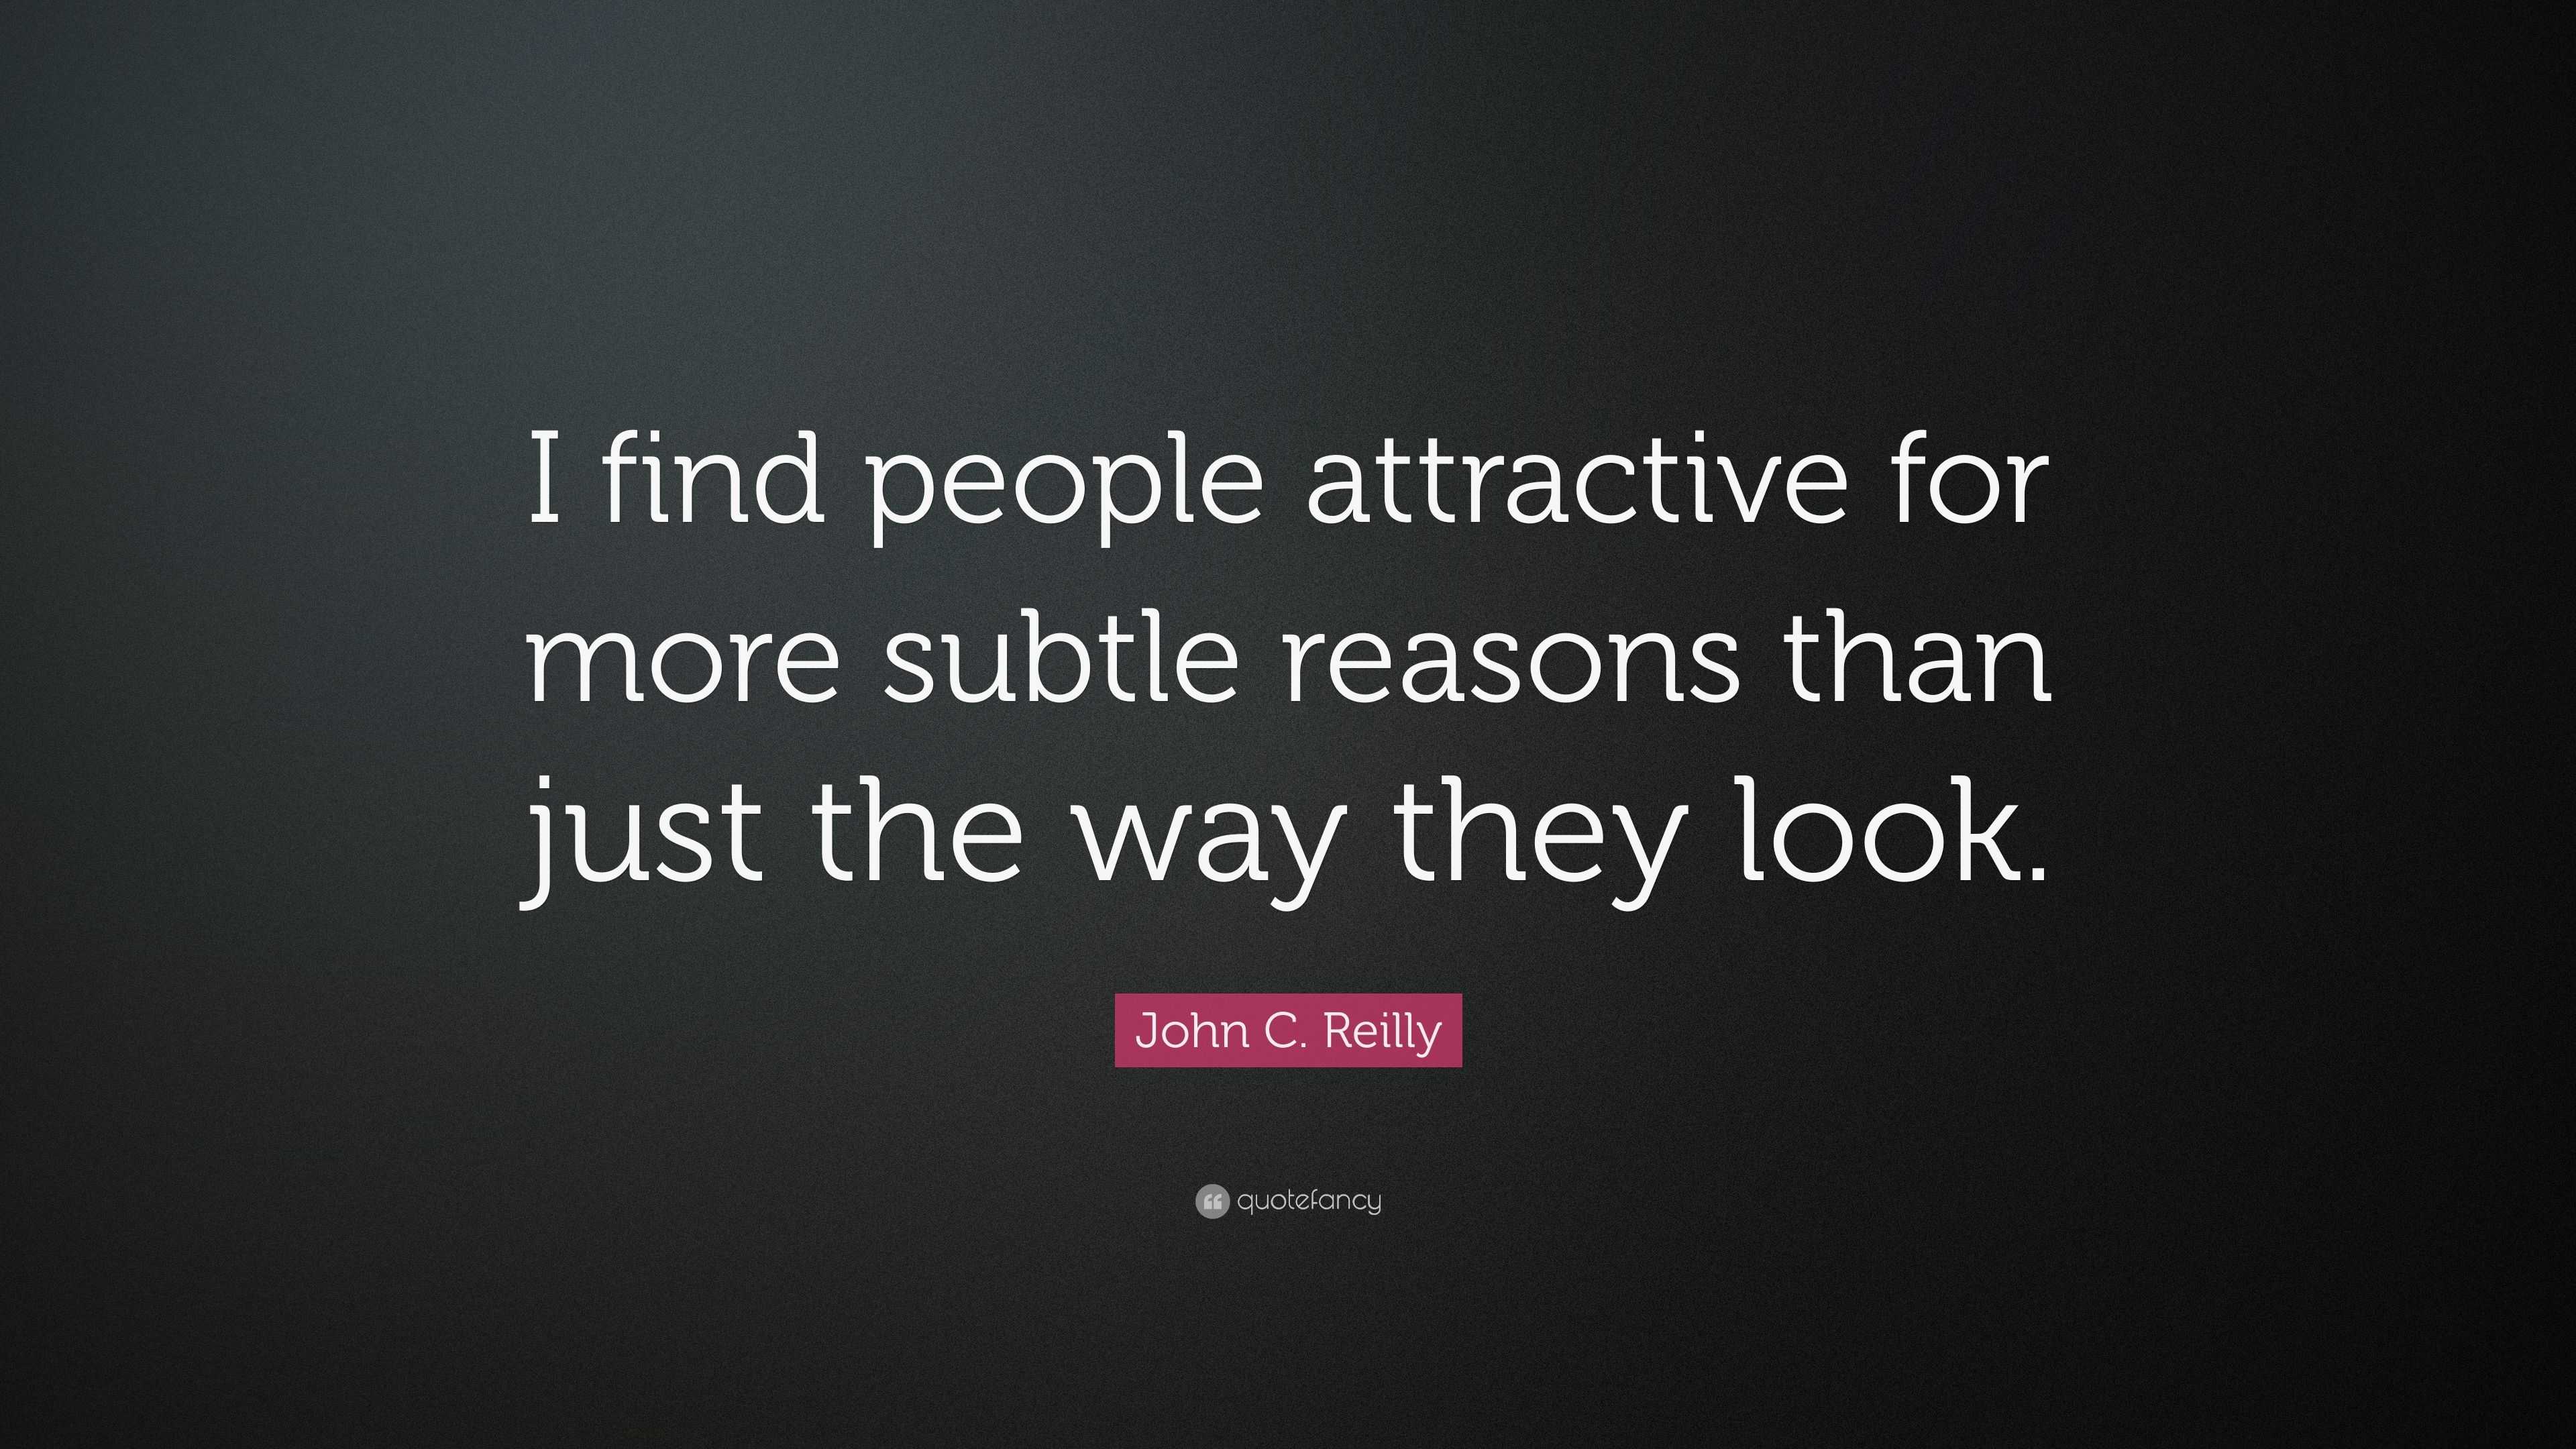 John C. Reilly Quote: “I find people attractive for more subtle reasons ...